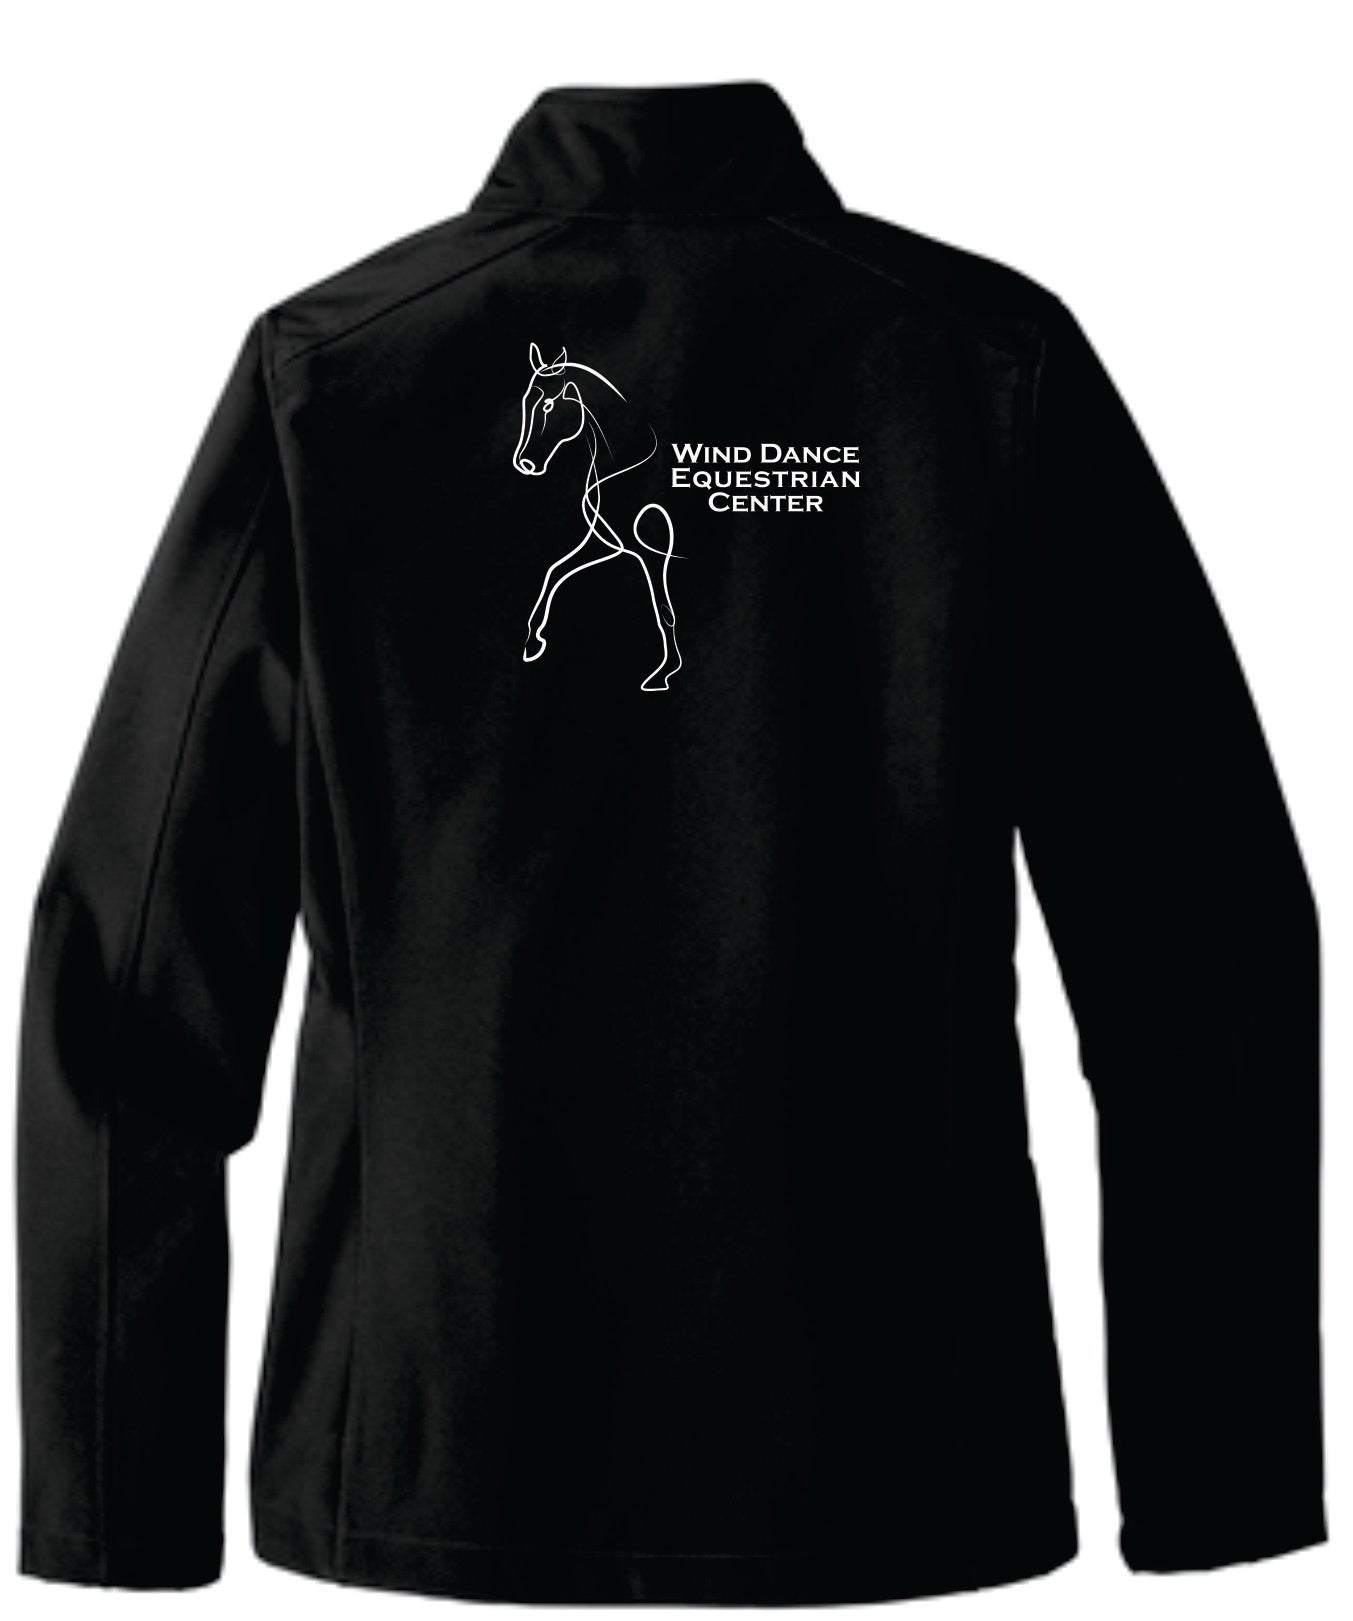 Wind Dance Equestrian Center Embroidered Jackets and Vests